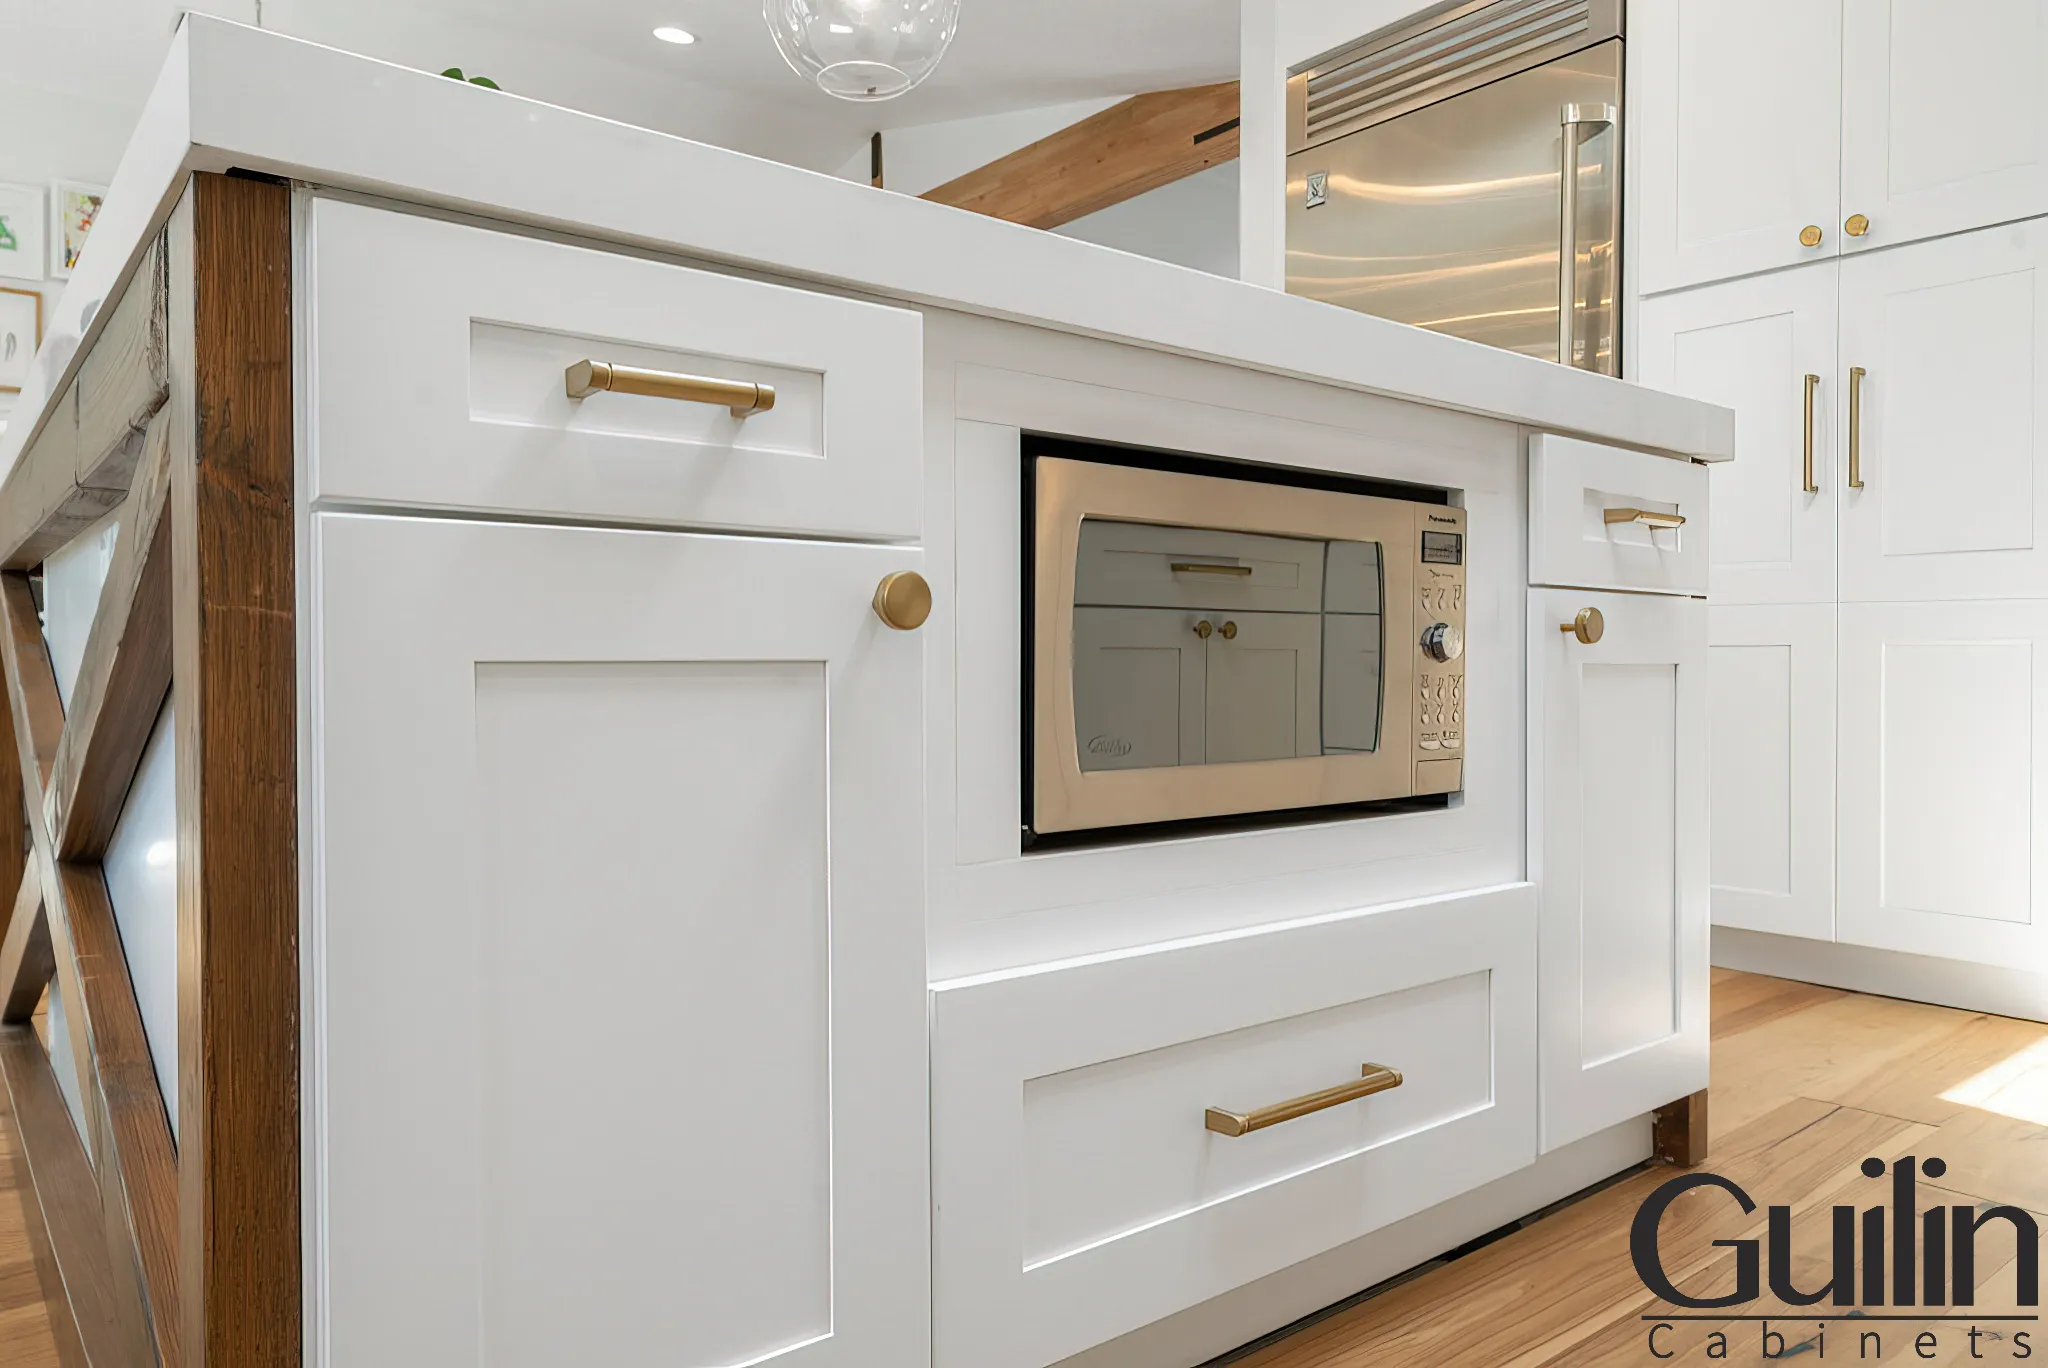 The reflective surfaces of white kitchen cabinets can make the room appear larger.